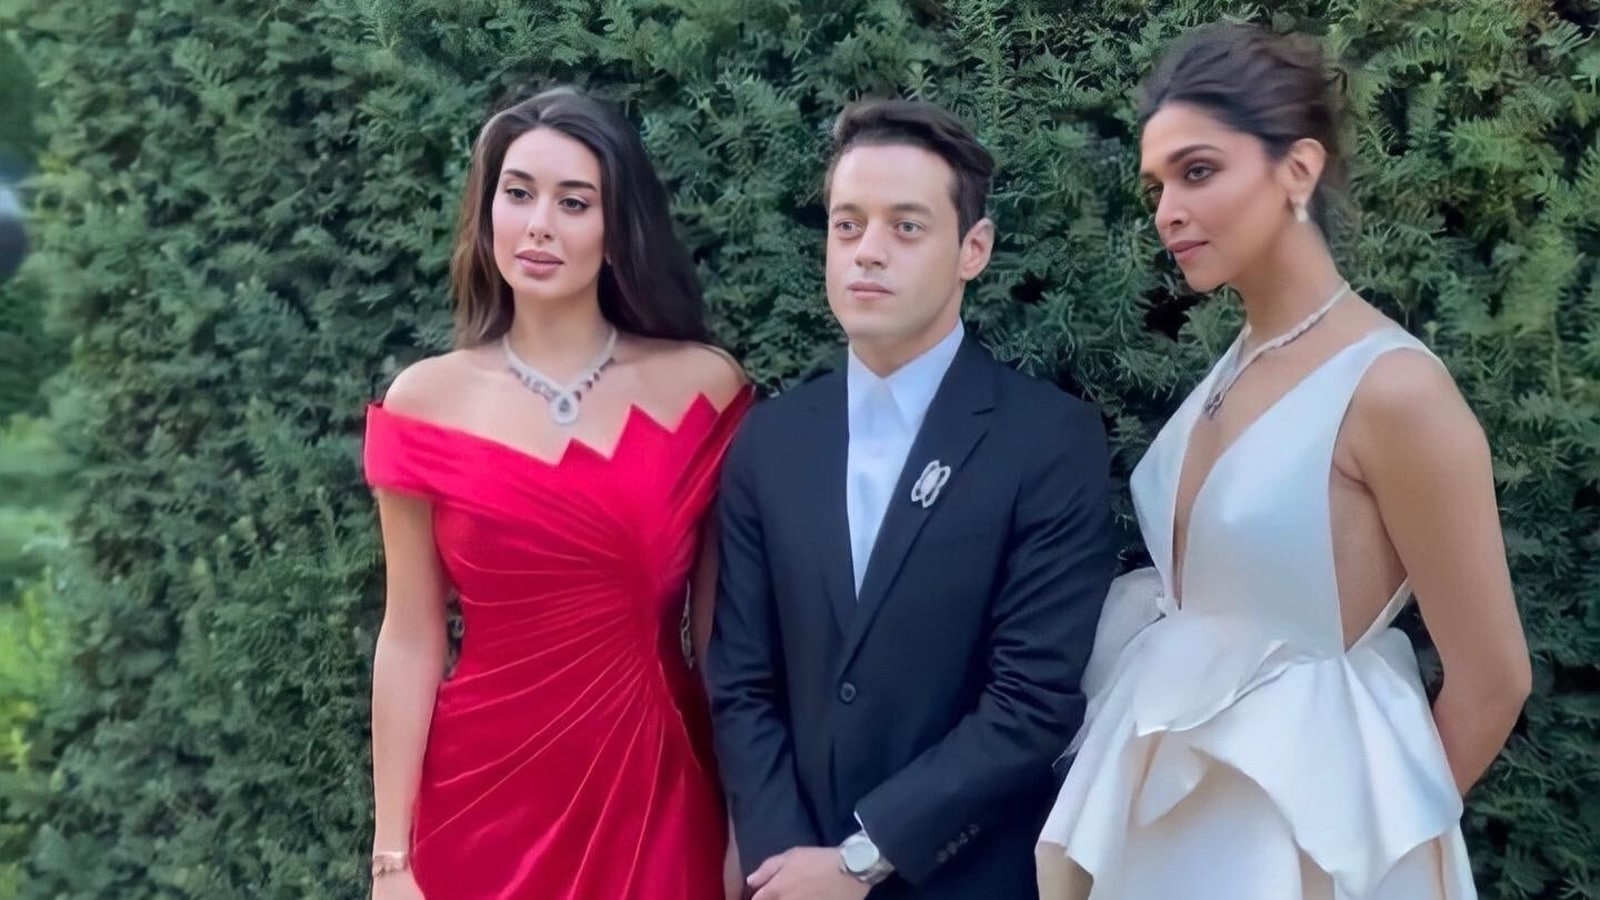 Deepika Padukone hangs out with with Rami Malek, Yasmine Sabri, Annabelle Wallis at Cartier event in Spain. See pics